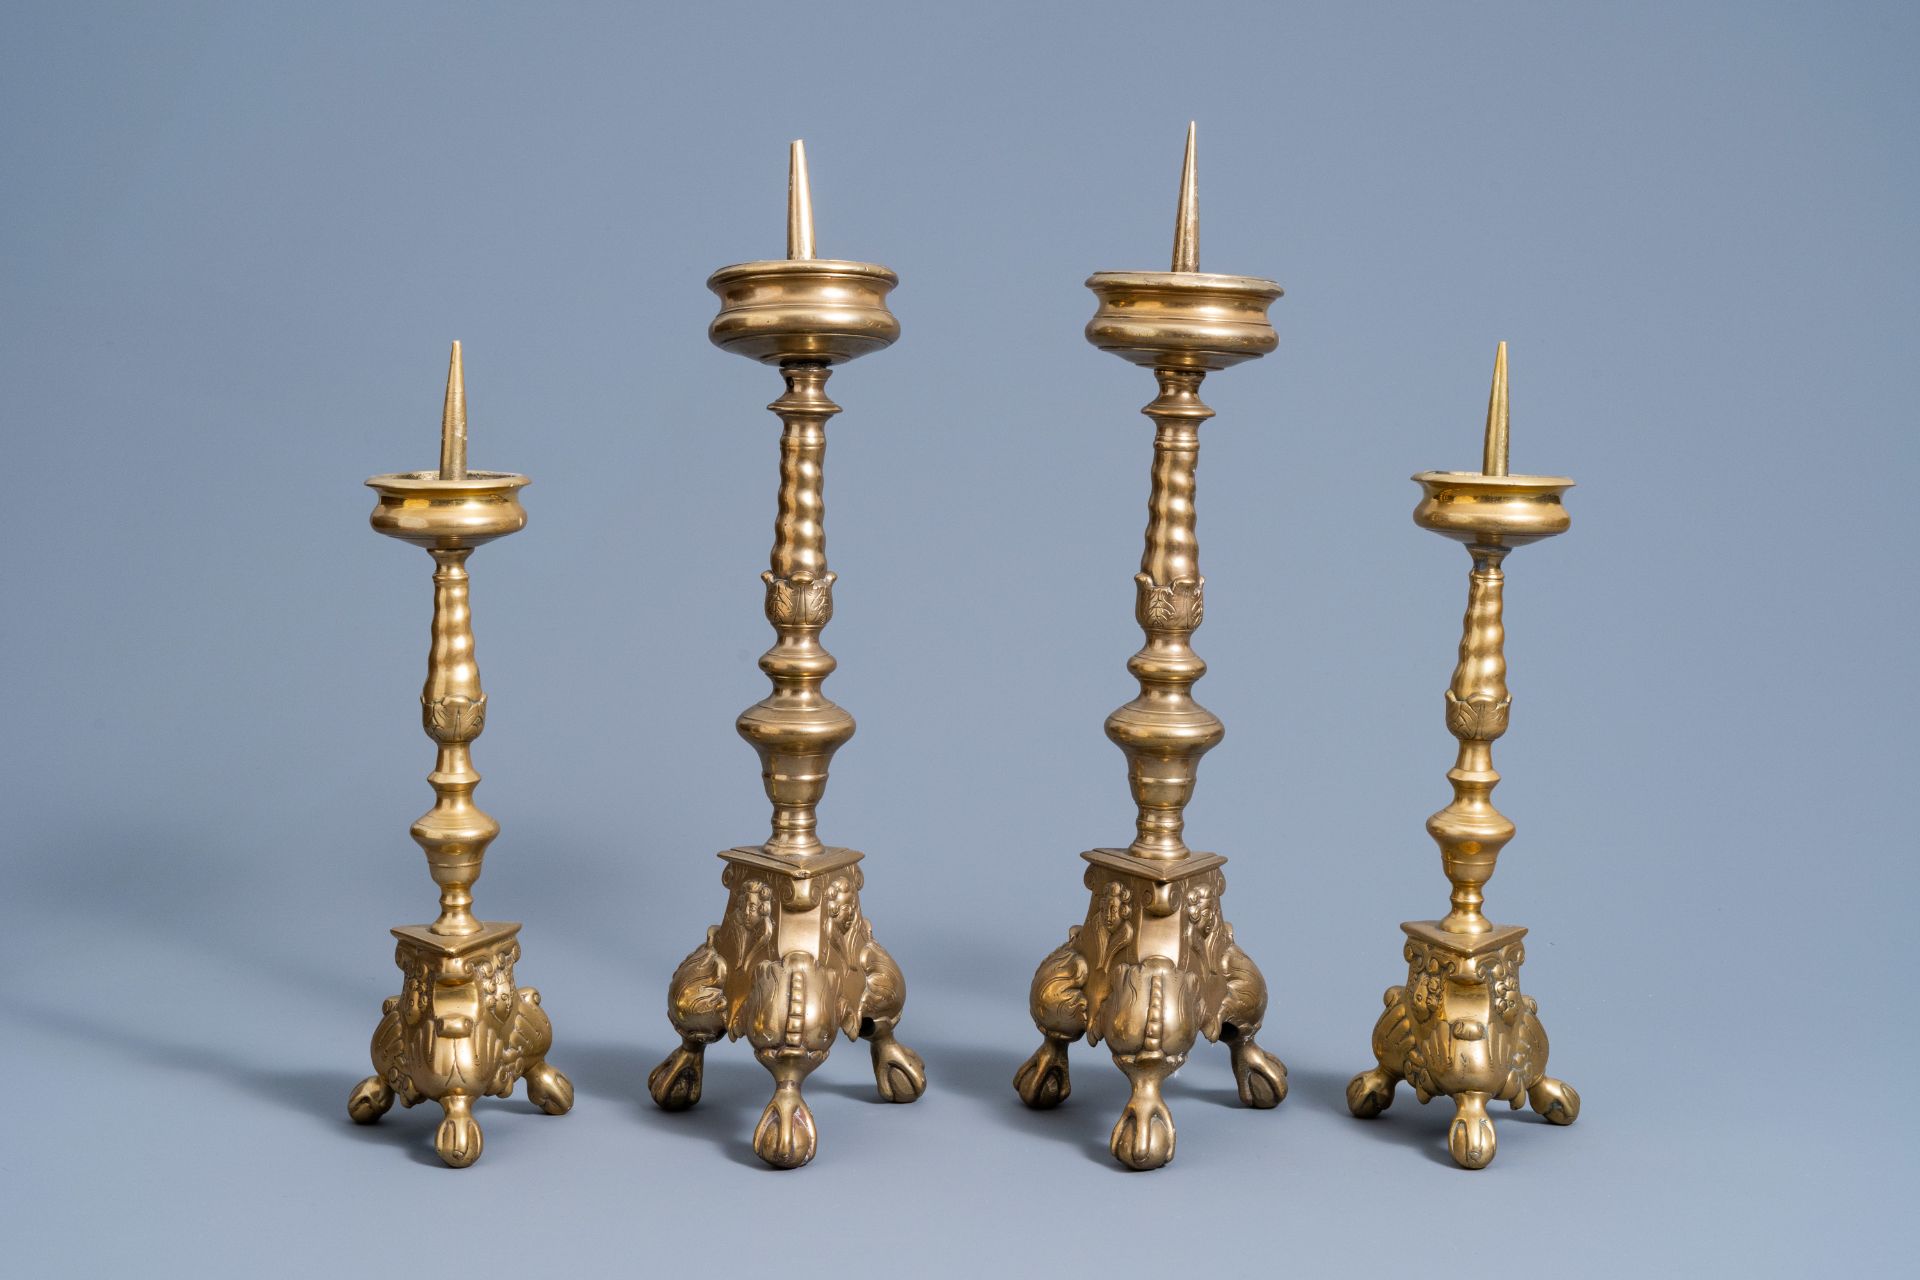 Two pairs of bronze pricket candlesticks, Flanders or The Netherlands, 17th C. - Image 3 of 7